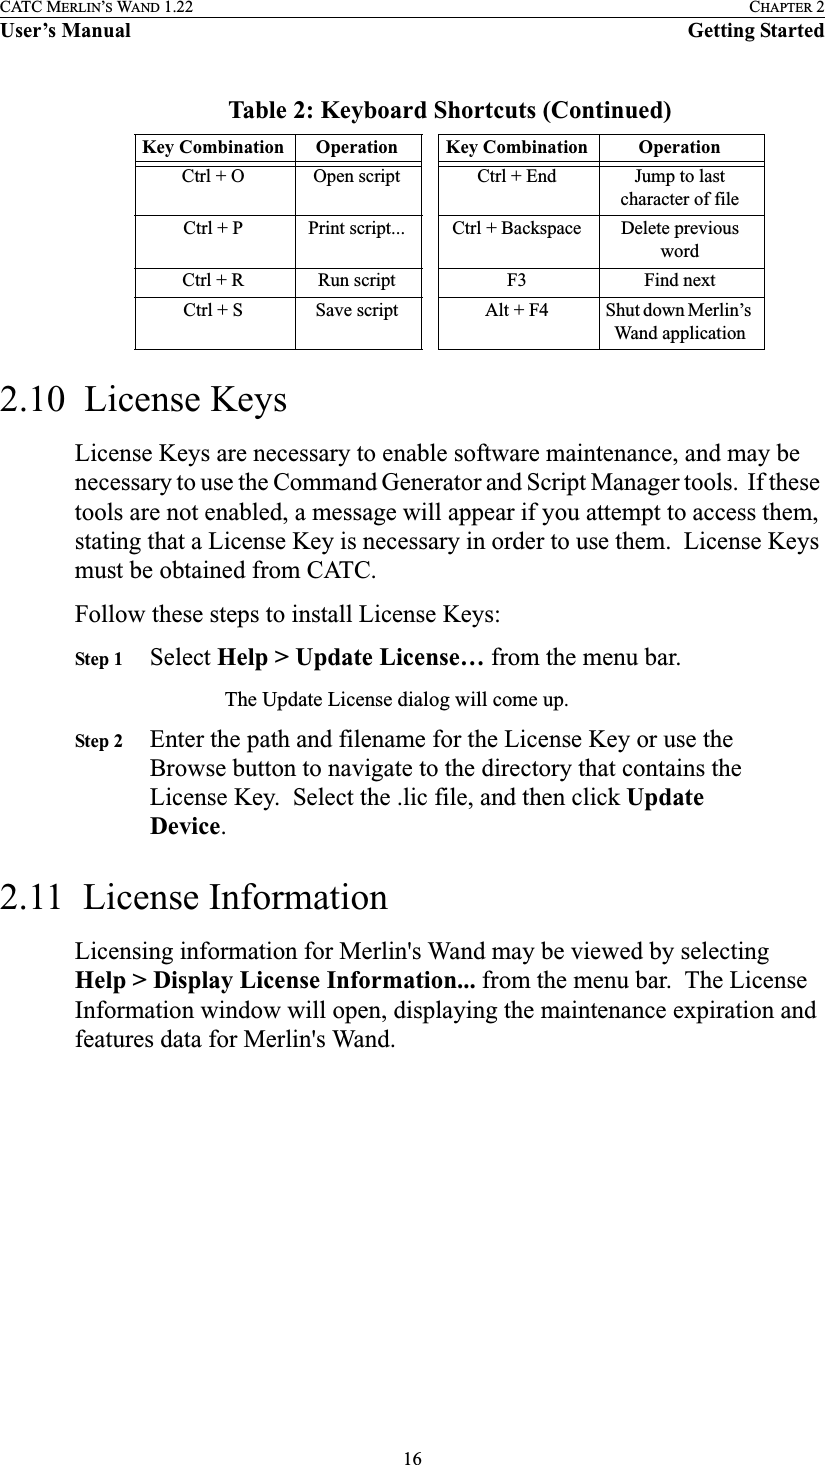 16CATC MERLIN’S WAND 1.22 CHAPTER 2User’s Manual Getting Started2.10  License KeysLicense Keys are necessary to enable software maintenance, and may be necessary to use the Command Generator and Script Manager tools.  If these tools are not enabled, a message will appear if you attempt to access them, stating that a License Key is necessary in order to use them.  License Keys must be obtained from CATC.Follow these steps to install License Keys:Step 1 Select Help &gt; Update License… from the menu bar.The Update License dialog will come up.Step 2 Enter the path and filename for the License Key or use the Browse button to navigate to the directory that contains the License Key.  Select the .lic file, and then click Update Device.2.11  License InformationLicensing information for Merlin&apos;s Wand may be viewed by selecting Help &gt; Display License Information... from the menu bar.  The License Information window will open, displaying the maintenance expiration and features data for Merlin&apos;s Wand.Ctrl + O Open script Ctrl + End Jump to last character of fileCtrl + P Print script... Ctrl + Backspace Delete previous wordCtrl + R Run script F3 Find nextCtrl + S Save script Alt + F4 Shut down Merlin’s Wand applicationTable 2: Keyboard Shortcuts (Continued)Key Combination Operation Key Combination Operation